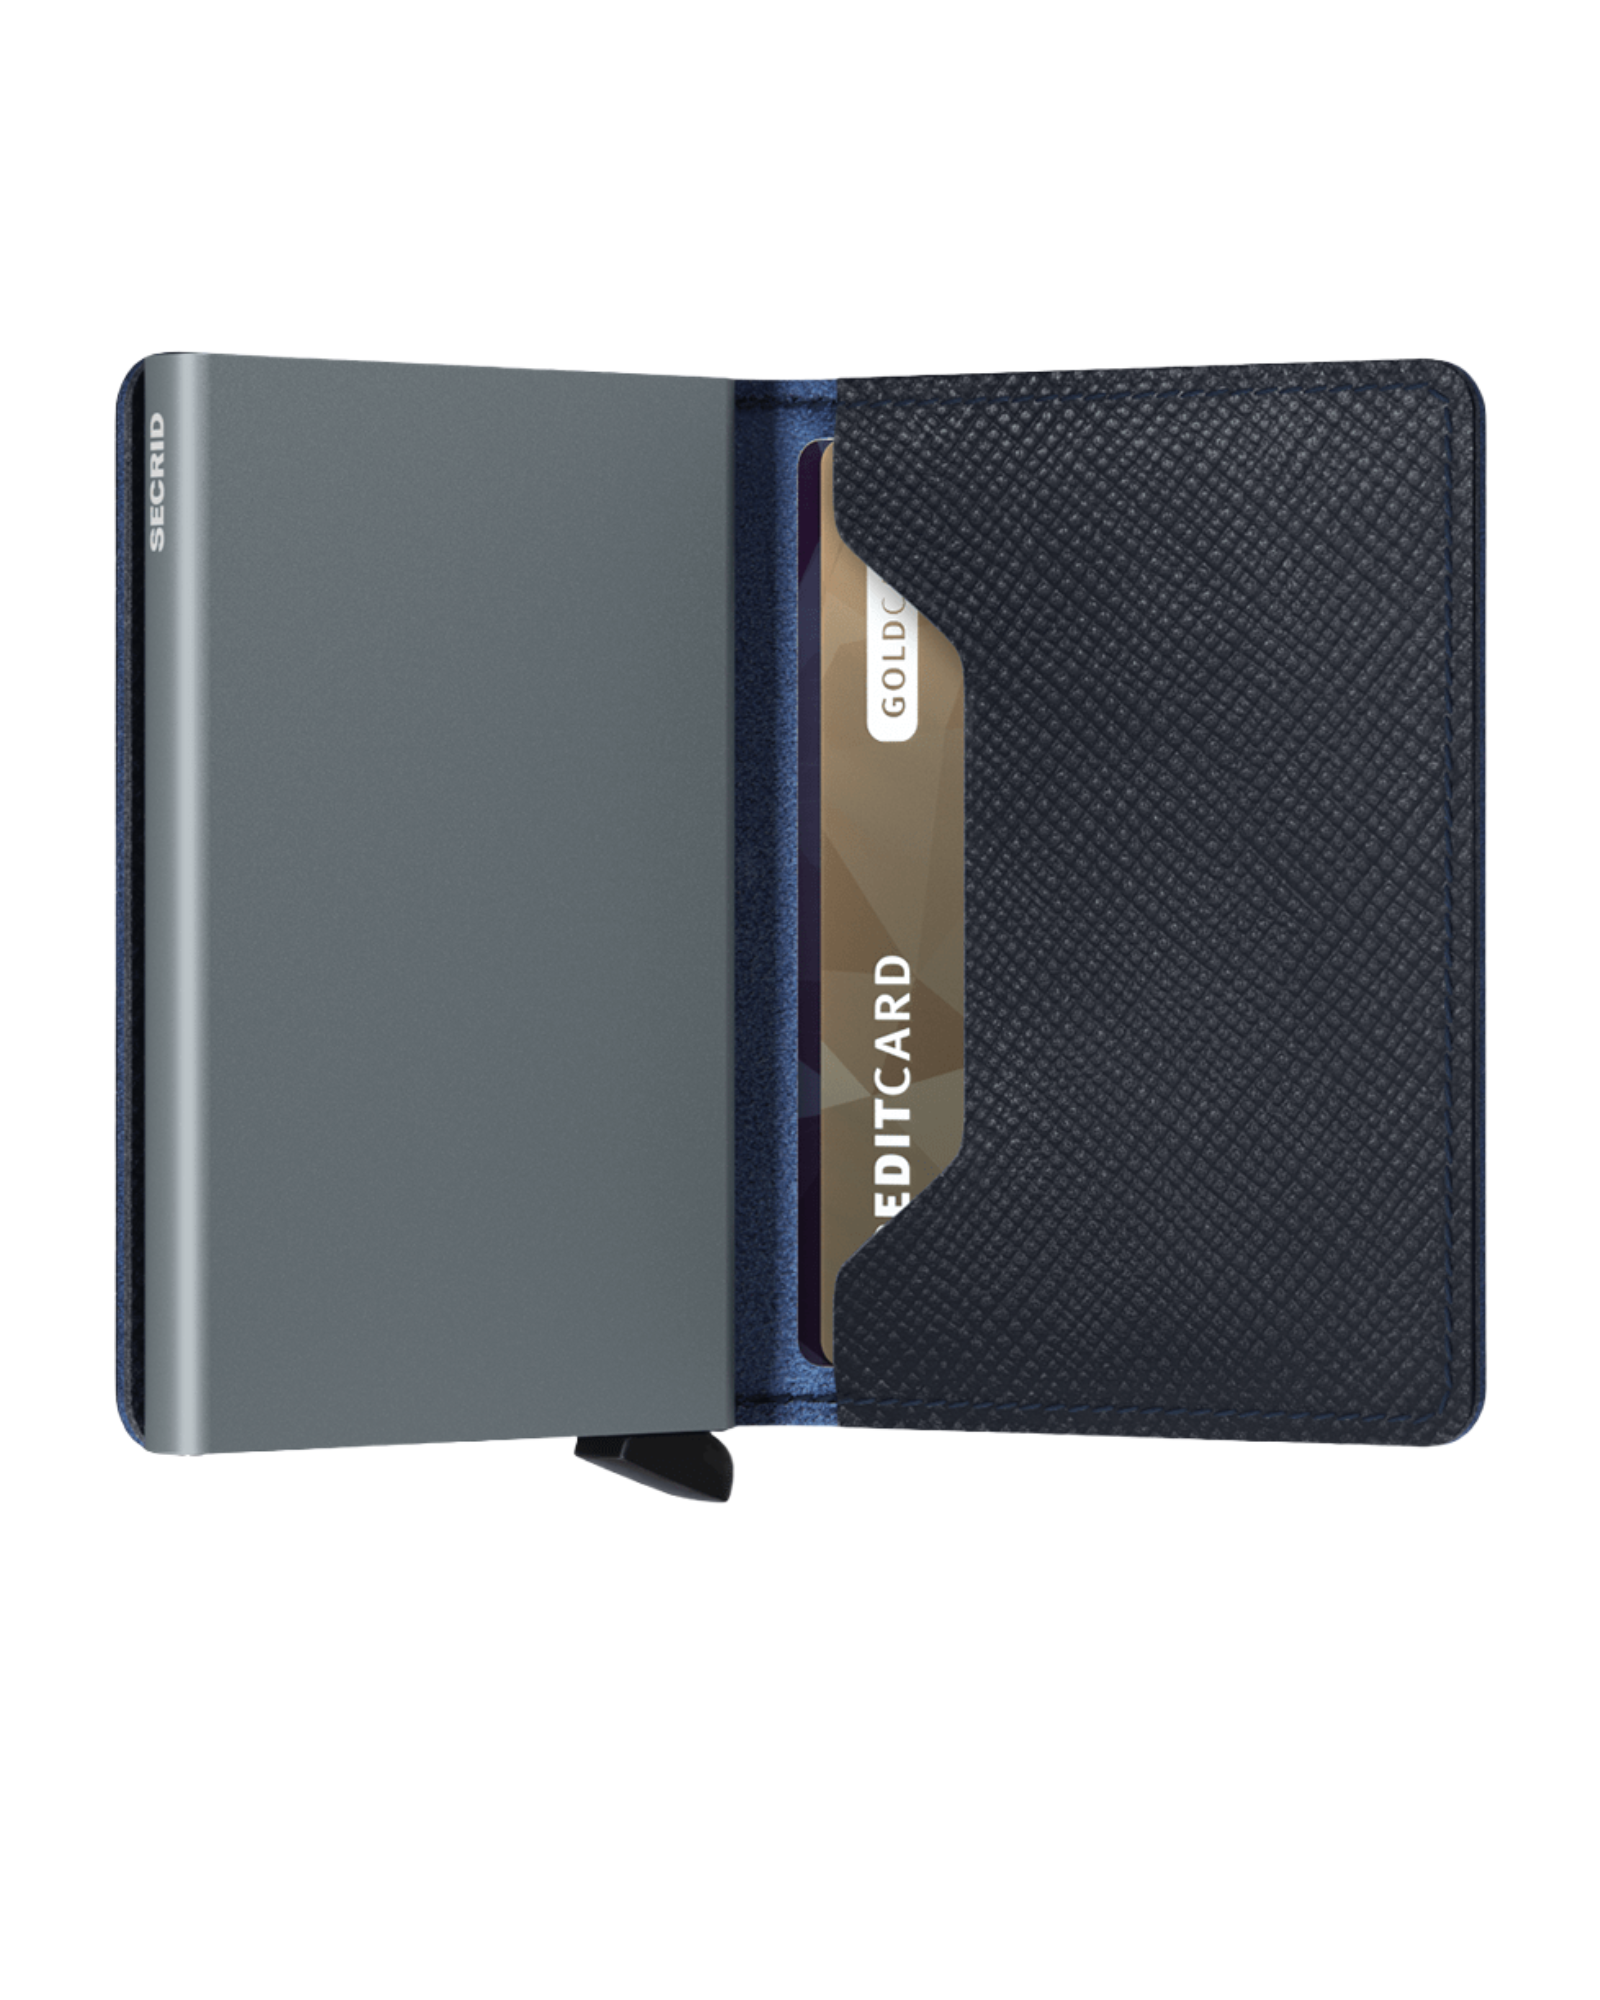 Secrid Slimwallet Saffiano Navy.The Slimwallet is a modern take on the classic billfold. With its slim profile it fits perfectly into every pocket. 